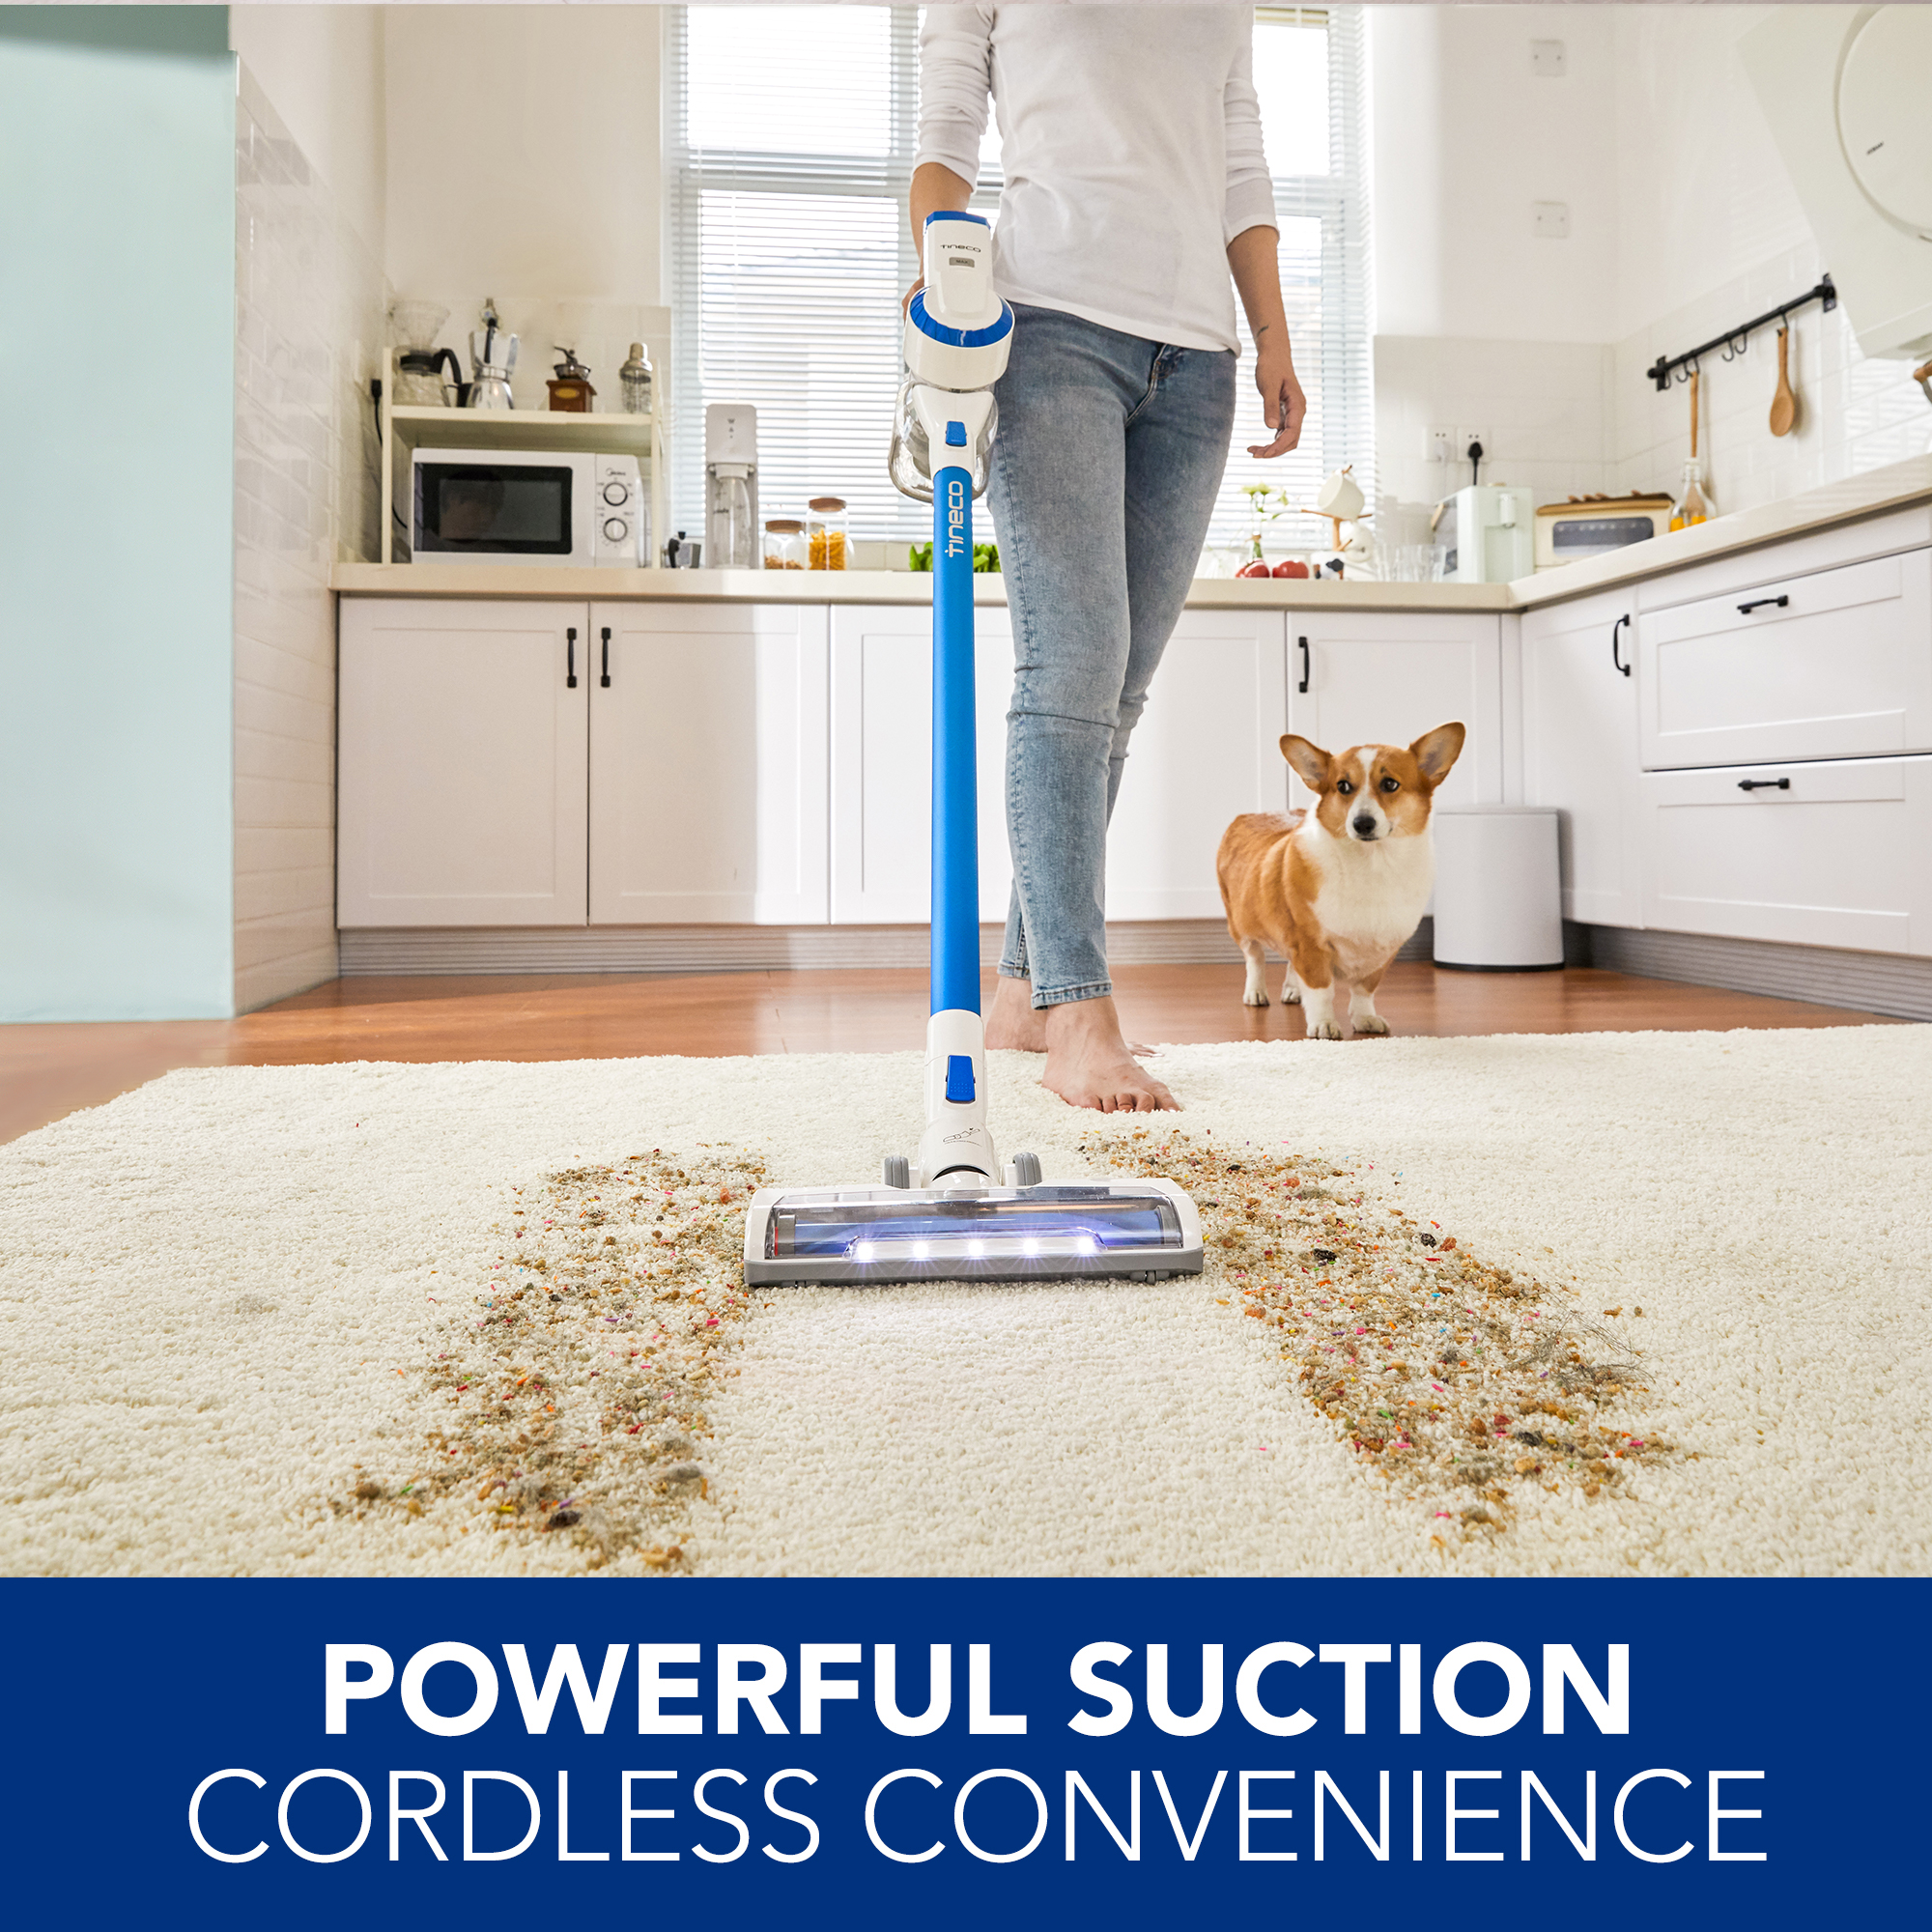 Tineco A10 Hero Lightweight Cordless Stick Vacuum Cleaner - image 2 of 6